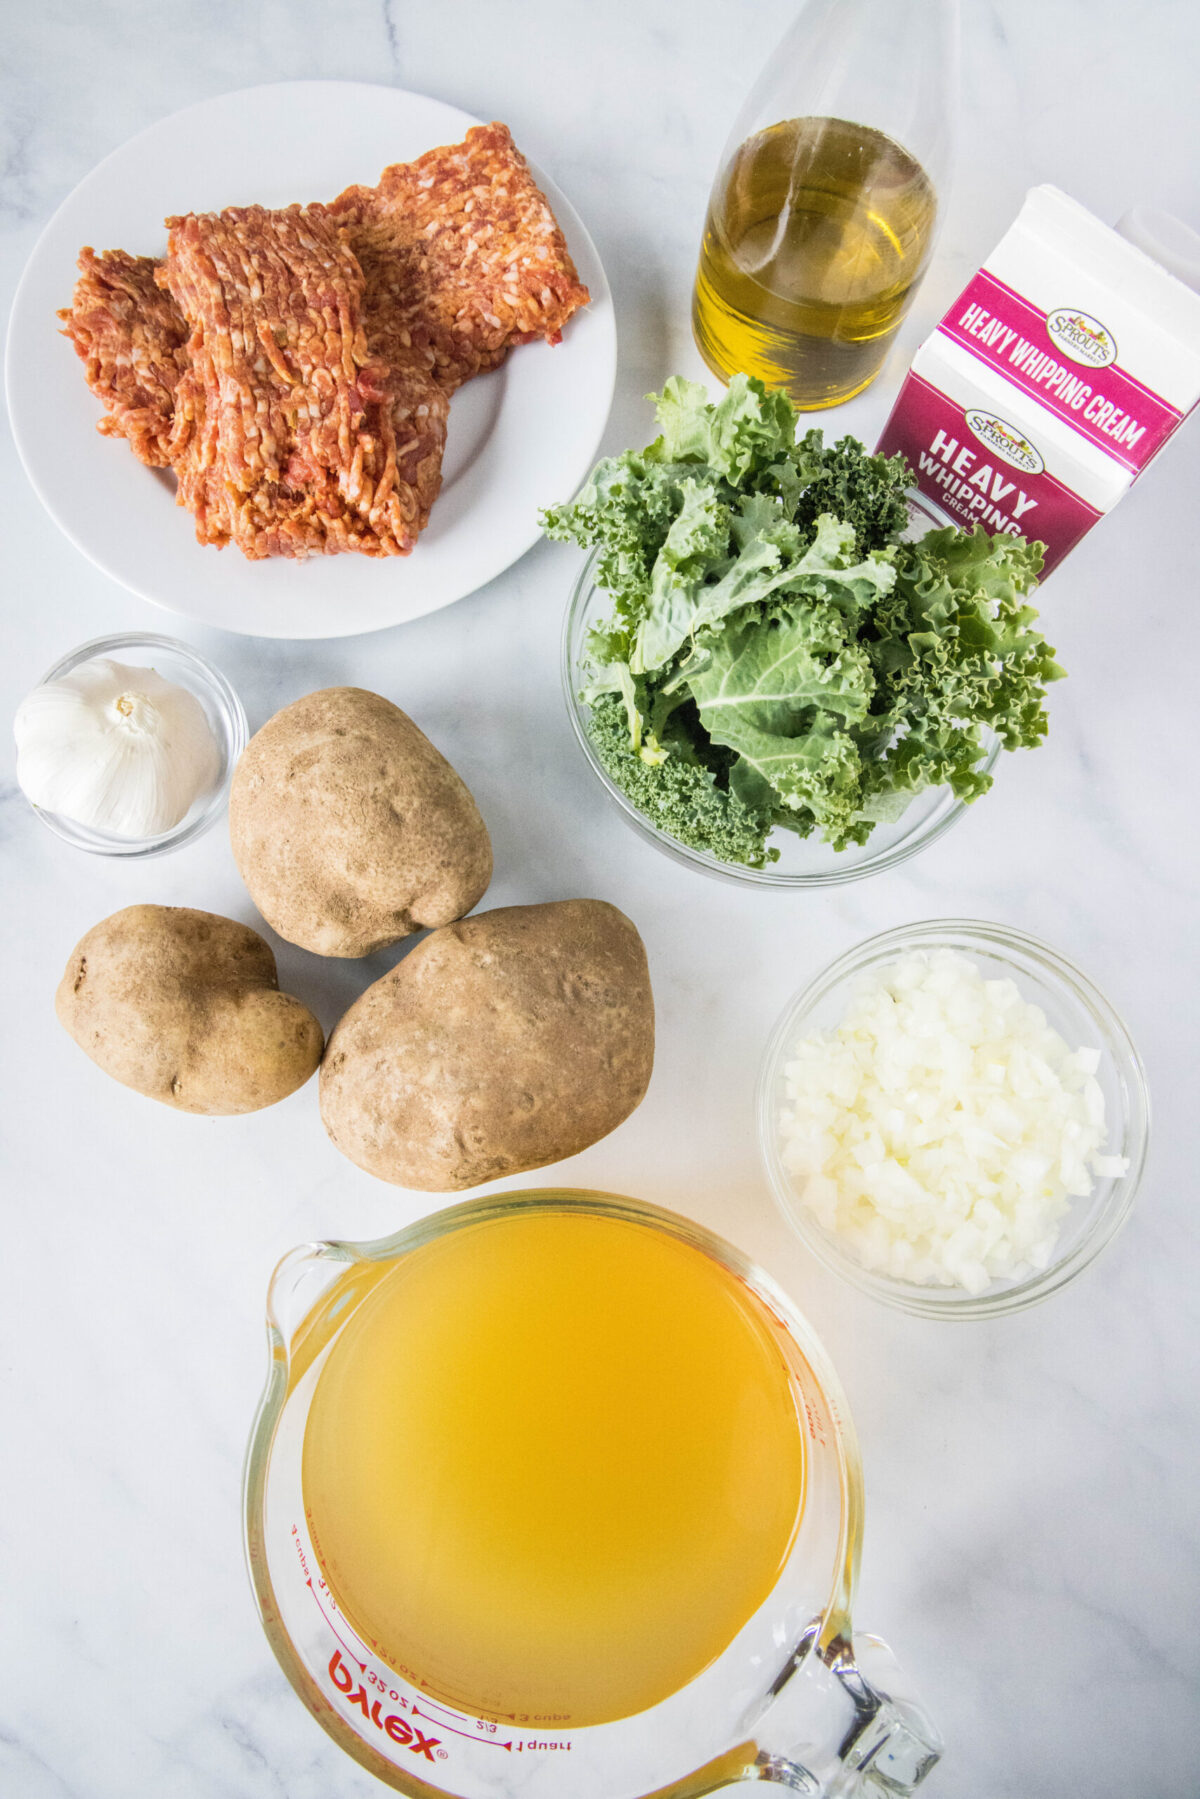 Overhead view of the ingredients needed for Zuppa Toscana: a plate of Italian sausage, a bowl of kale, a bowl of minced onion, a pyrex of chicken broth, a bowl of garlic, three potatoes, a jug of olive oil, and a carton of cream